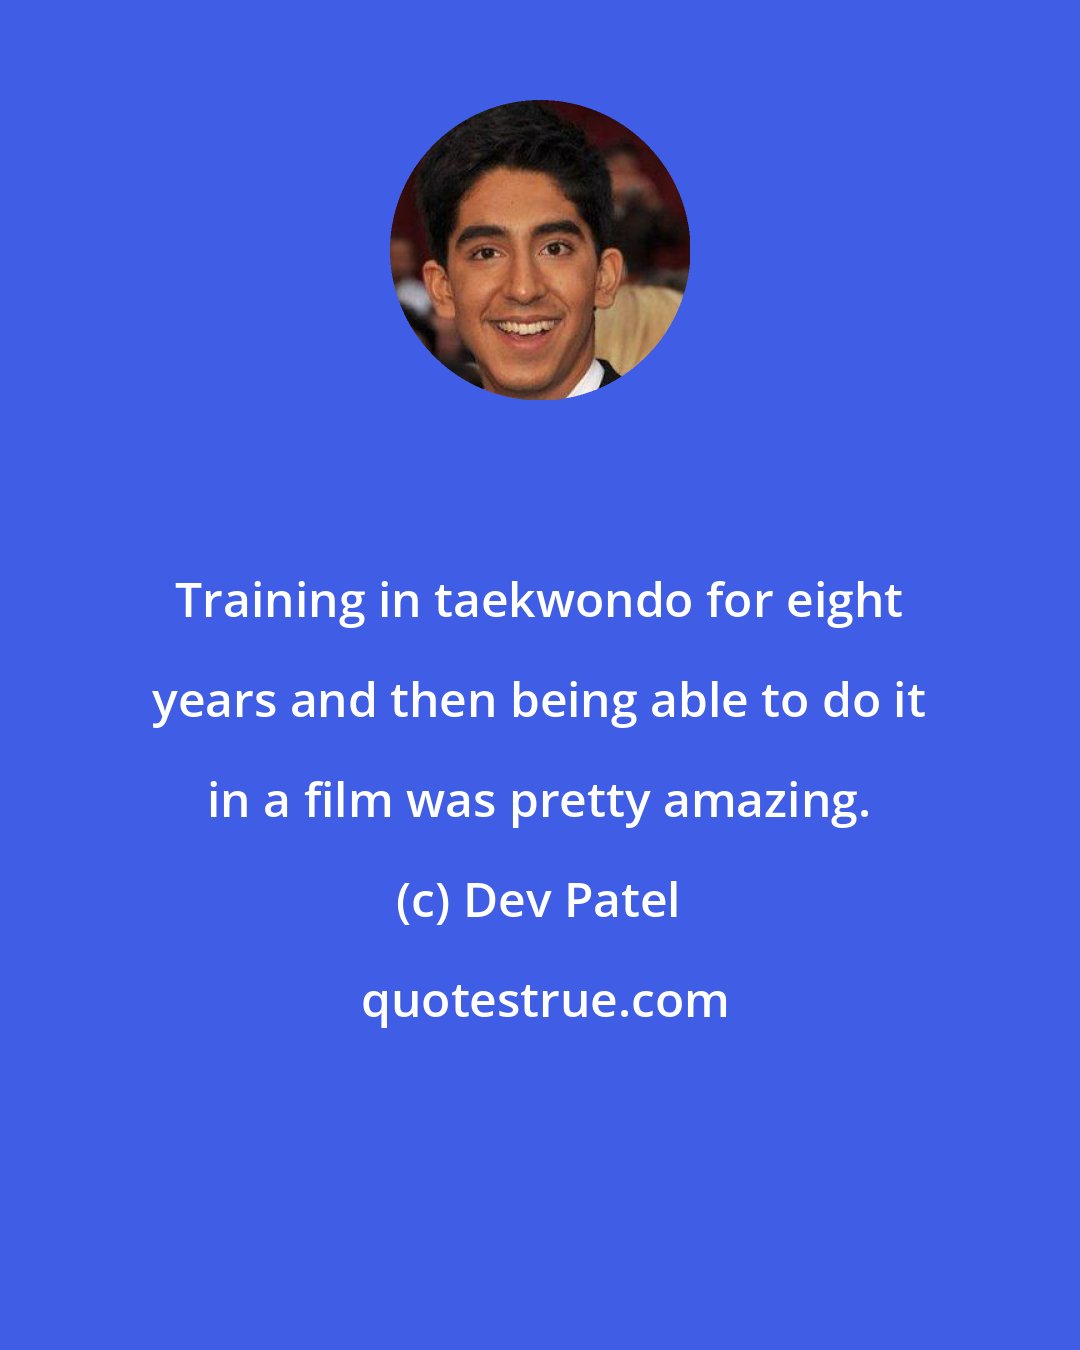 Dev Patel: Training in taekwondo for eight years and then being able to do it in a film was pretty amazing.